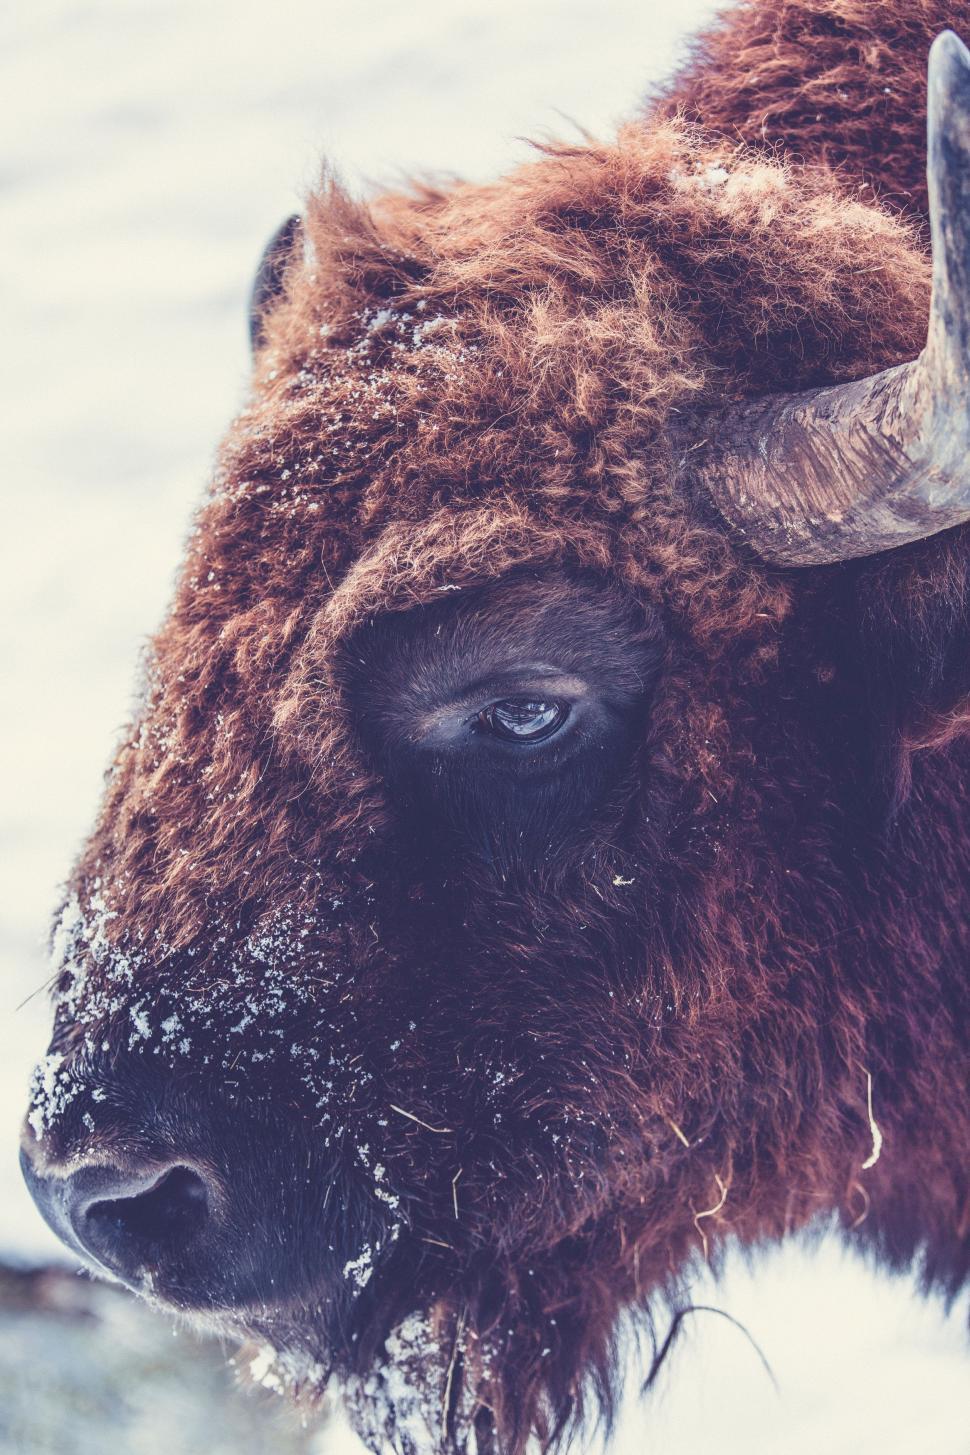 Free Image of Bison Close Up in Snow 